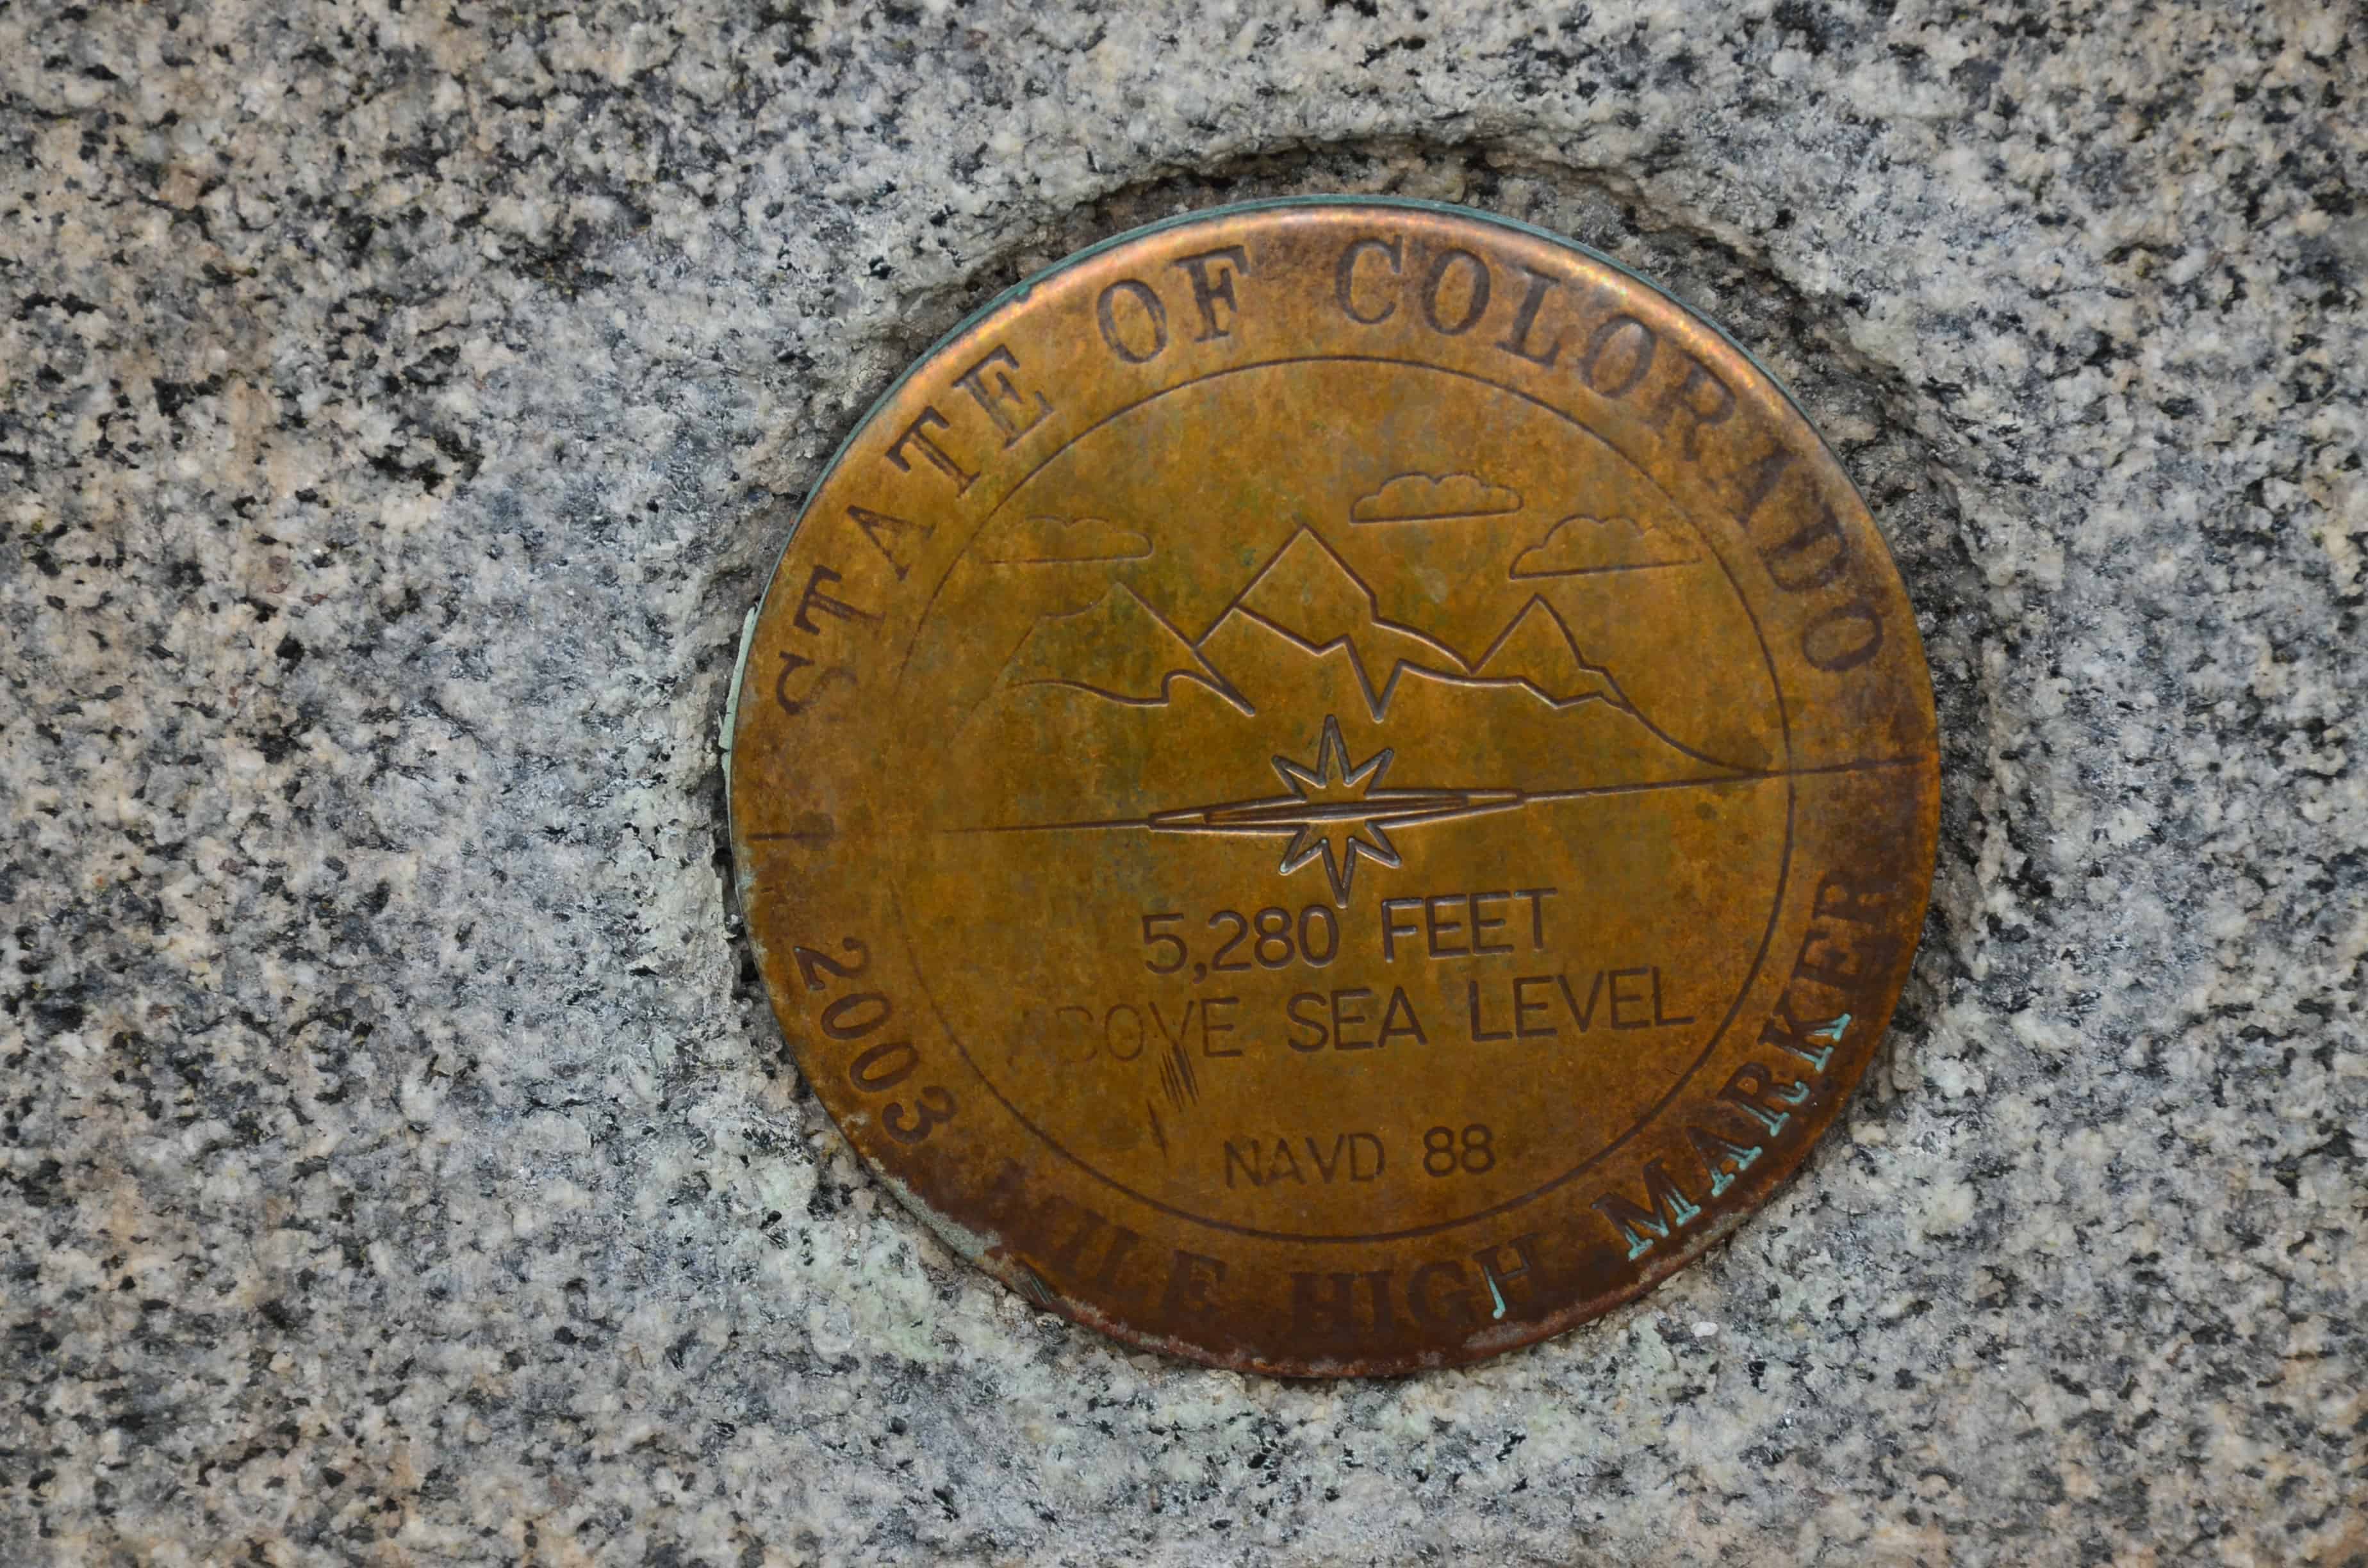 Mile High Marker at the Colorado State Capitol in Denver